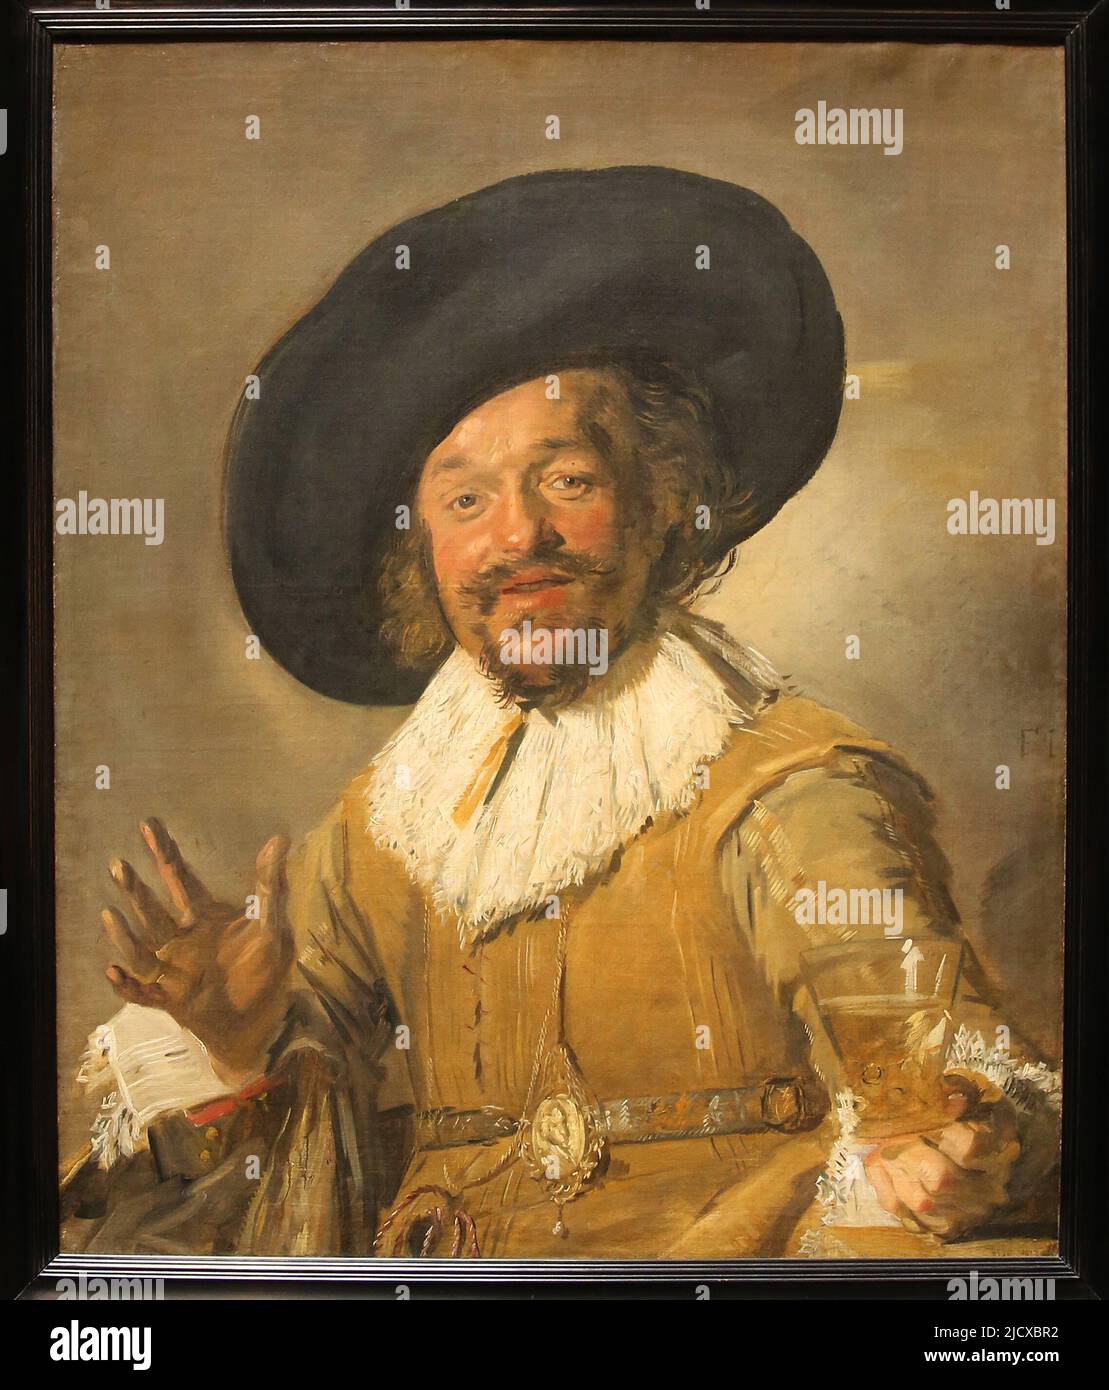 A Militiaman Holding a Berkemeyer, known as the 'Merry Drinker' by Frans Hals (c. 1582-1666). Oil on canvas, c. 1628-1630. Rijksmuseum. Amsterdam. Net Stock Photo